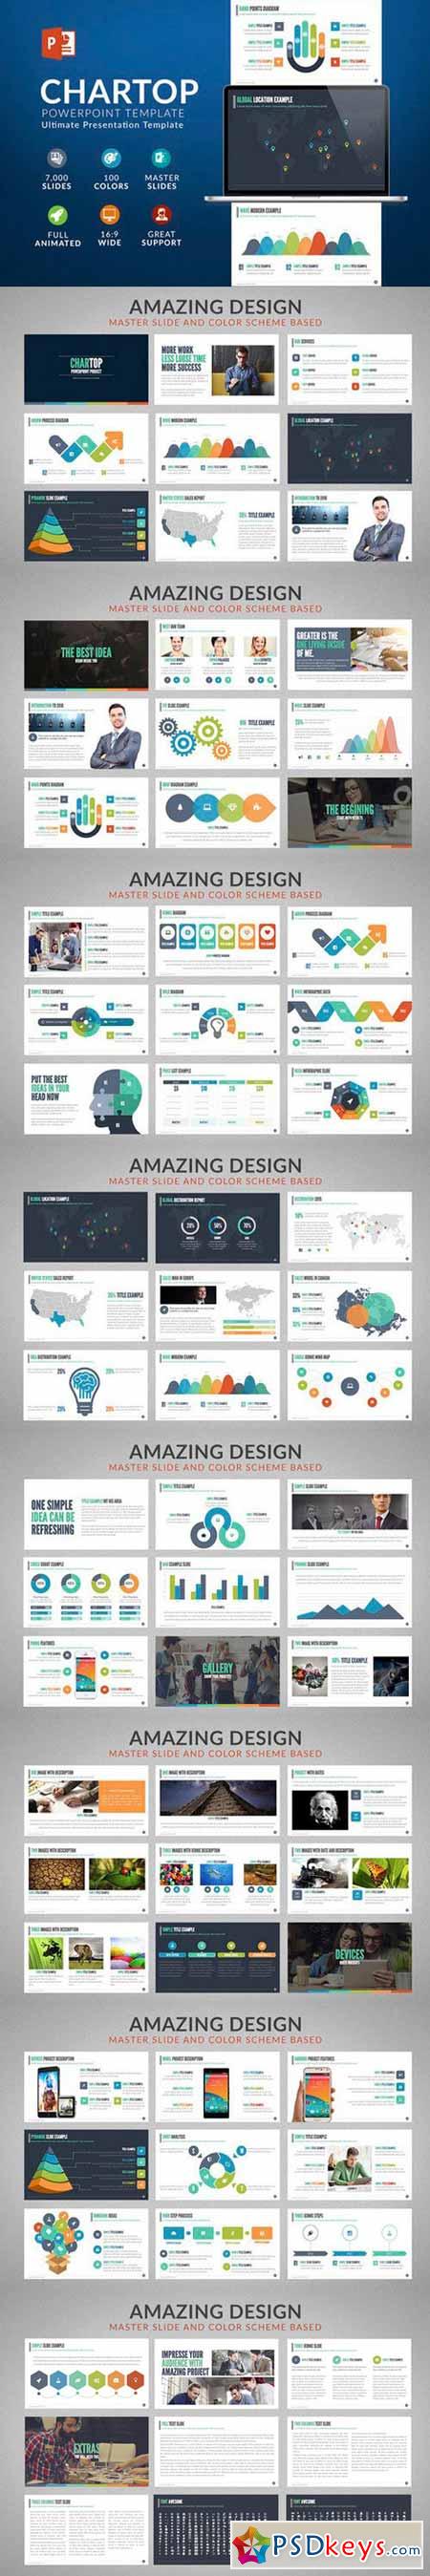 Chartop Powerpoint template 490290